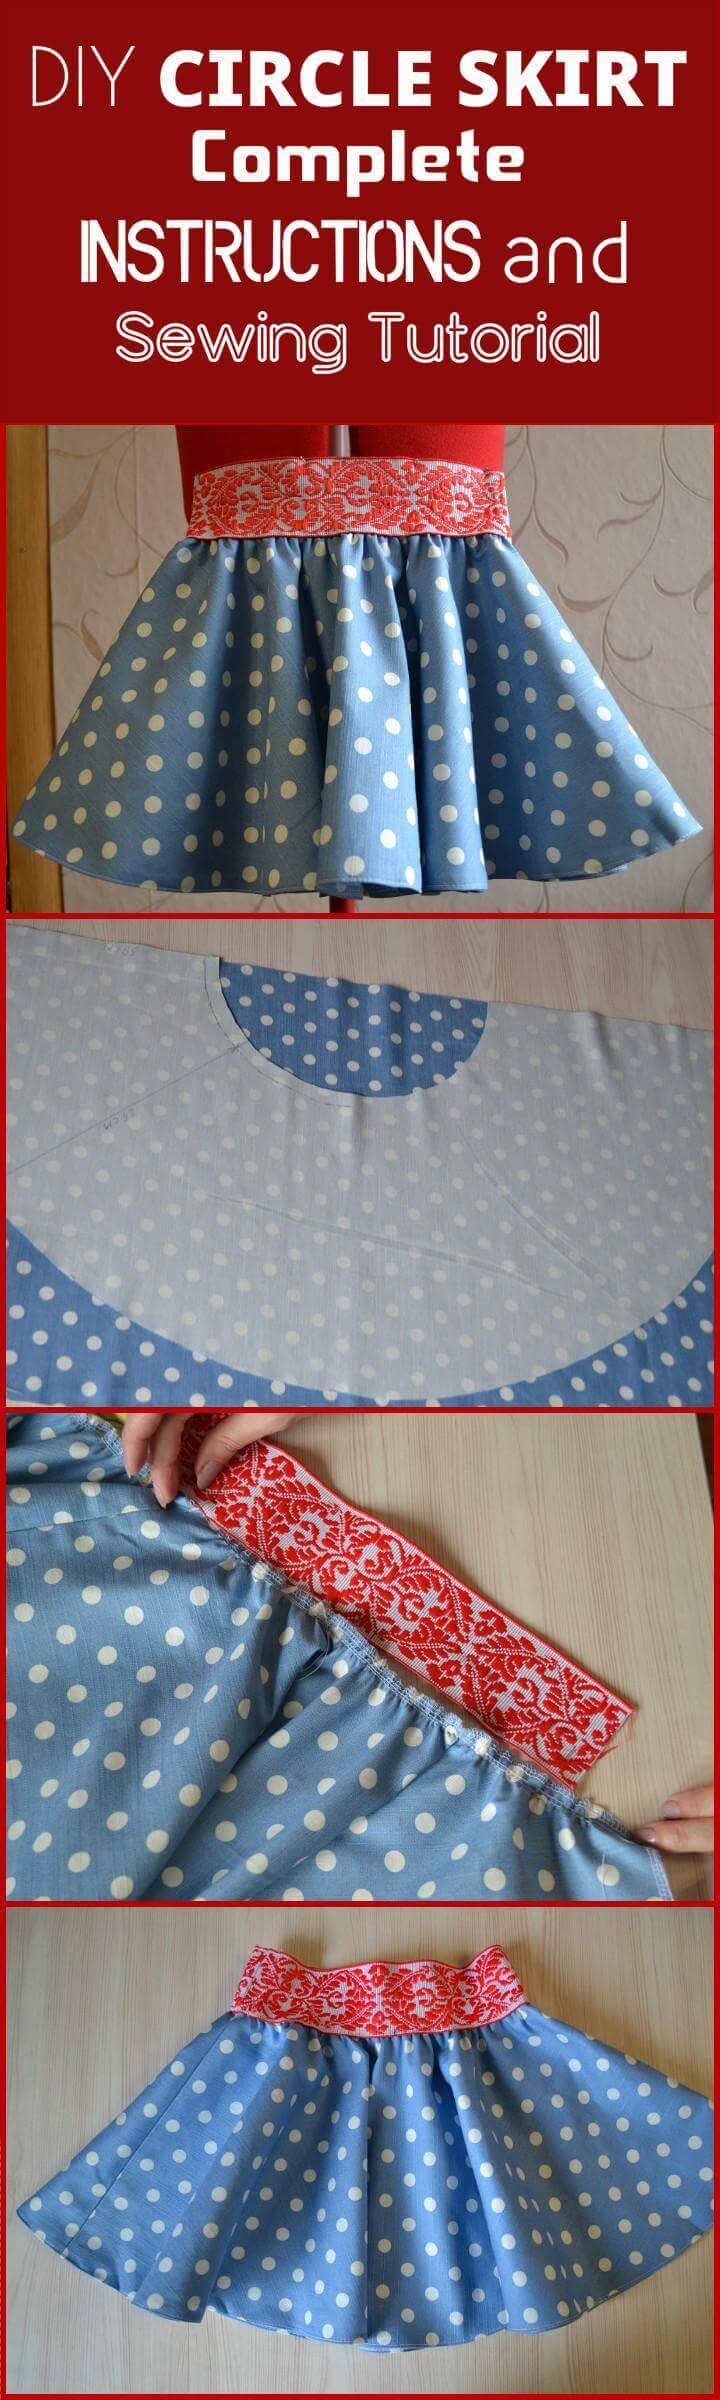 easy circle skirt sewing instructions